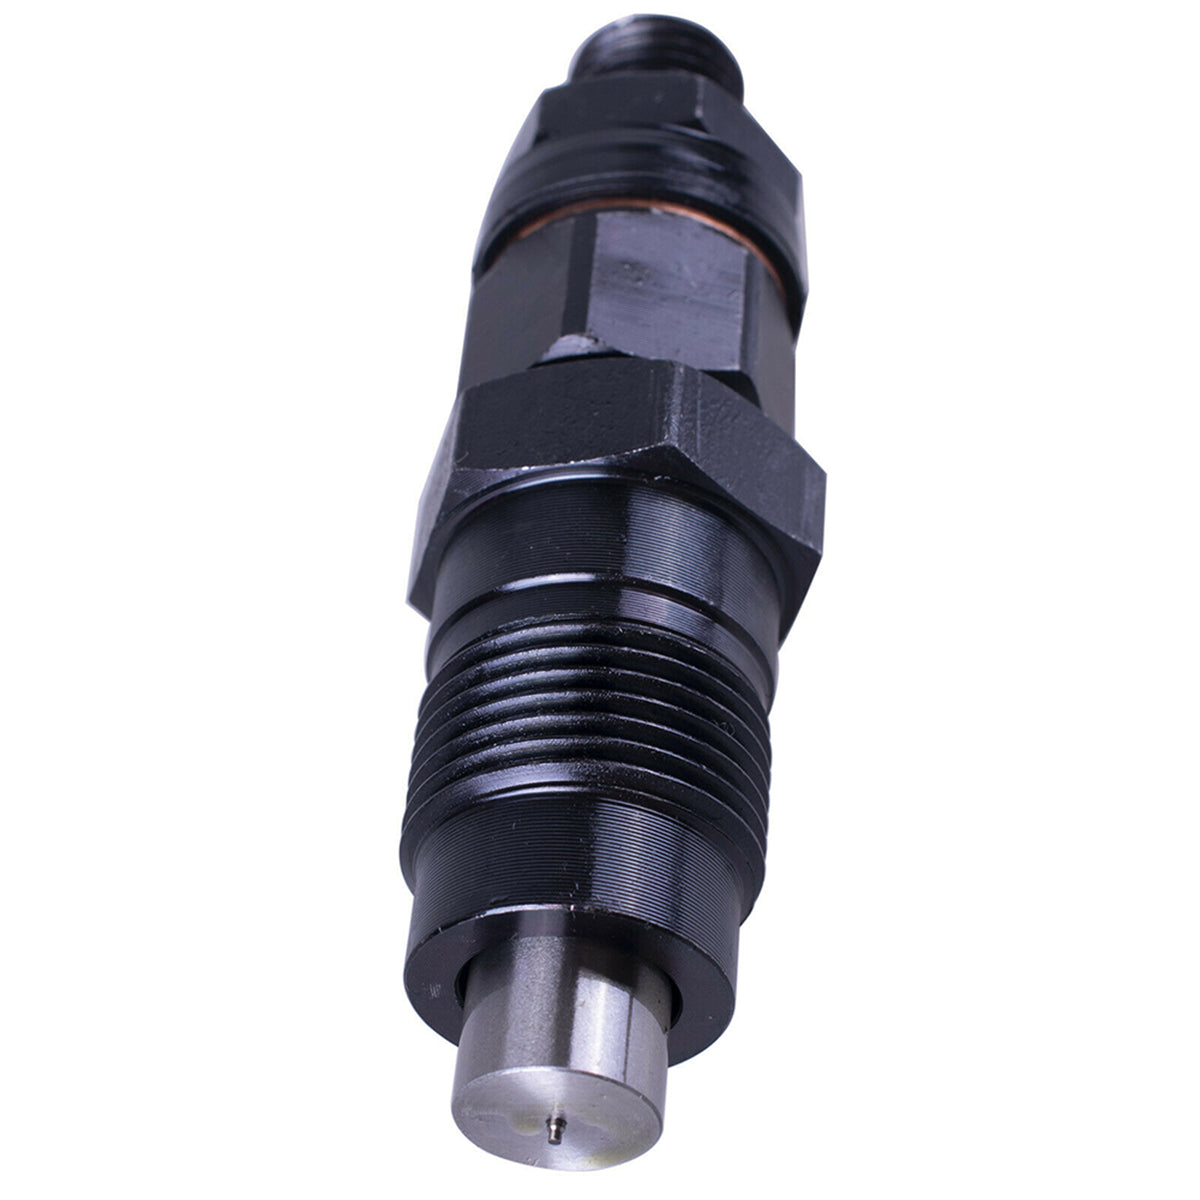 Fuel Injector 16600-63G21, Fuel Injector for Nissan, Daysyore Fuel Injector, Auto Fuel Injector, Car Fuel Injector